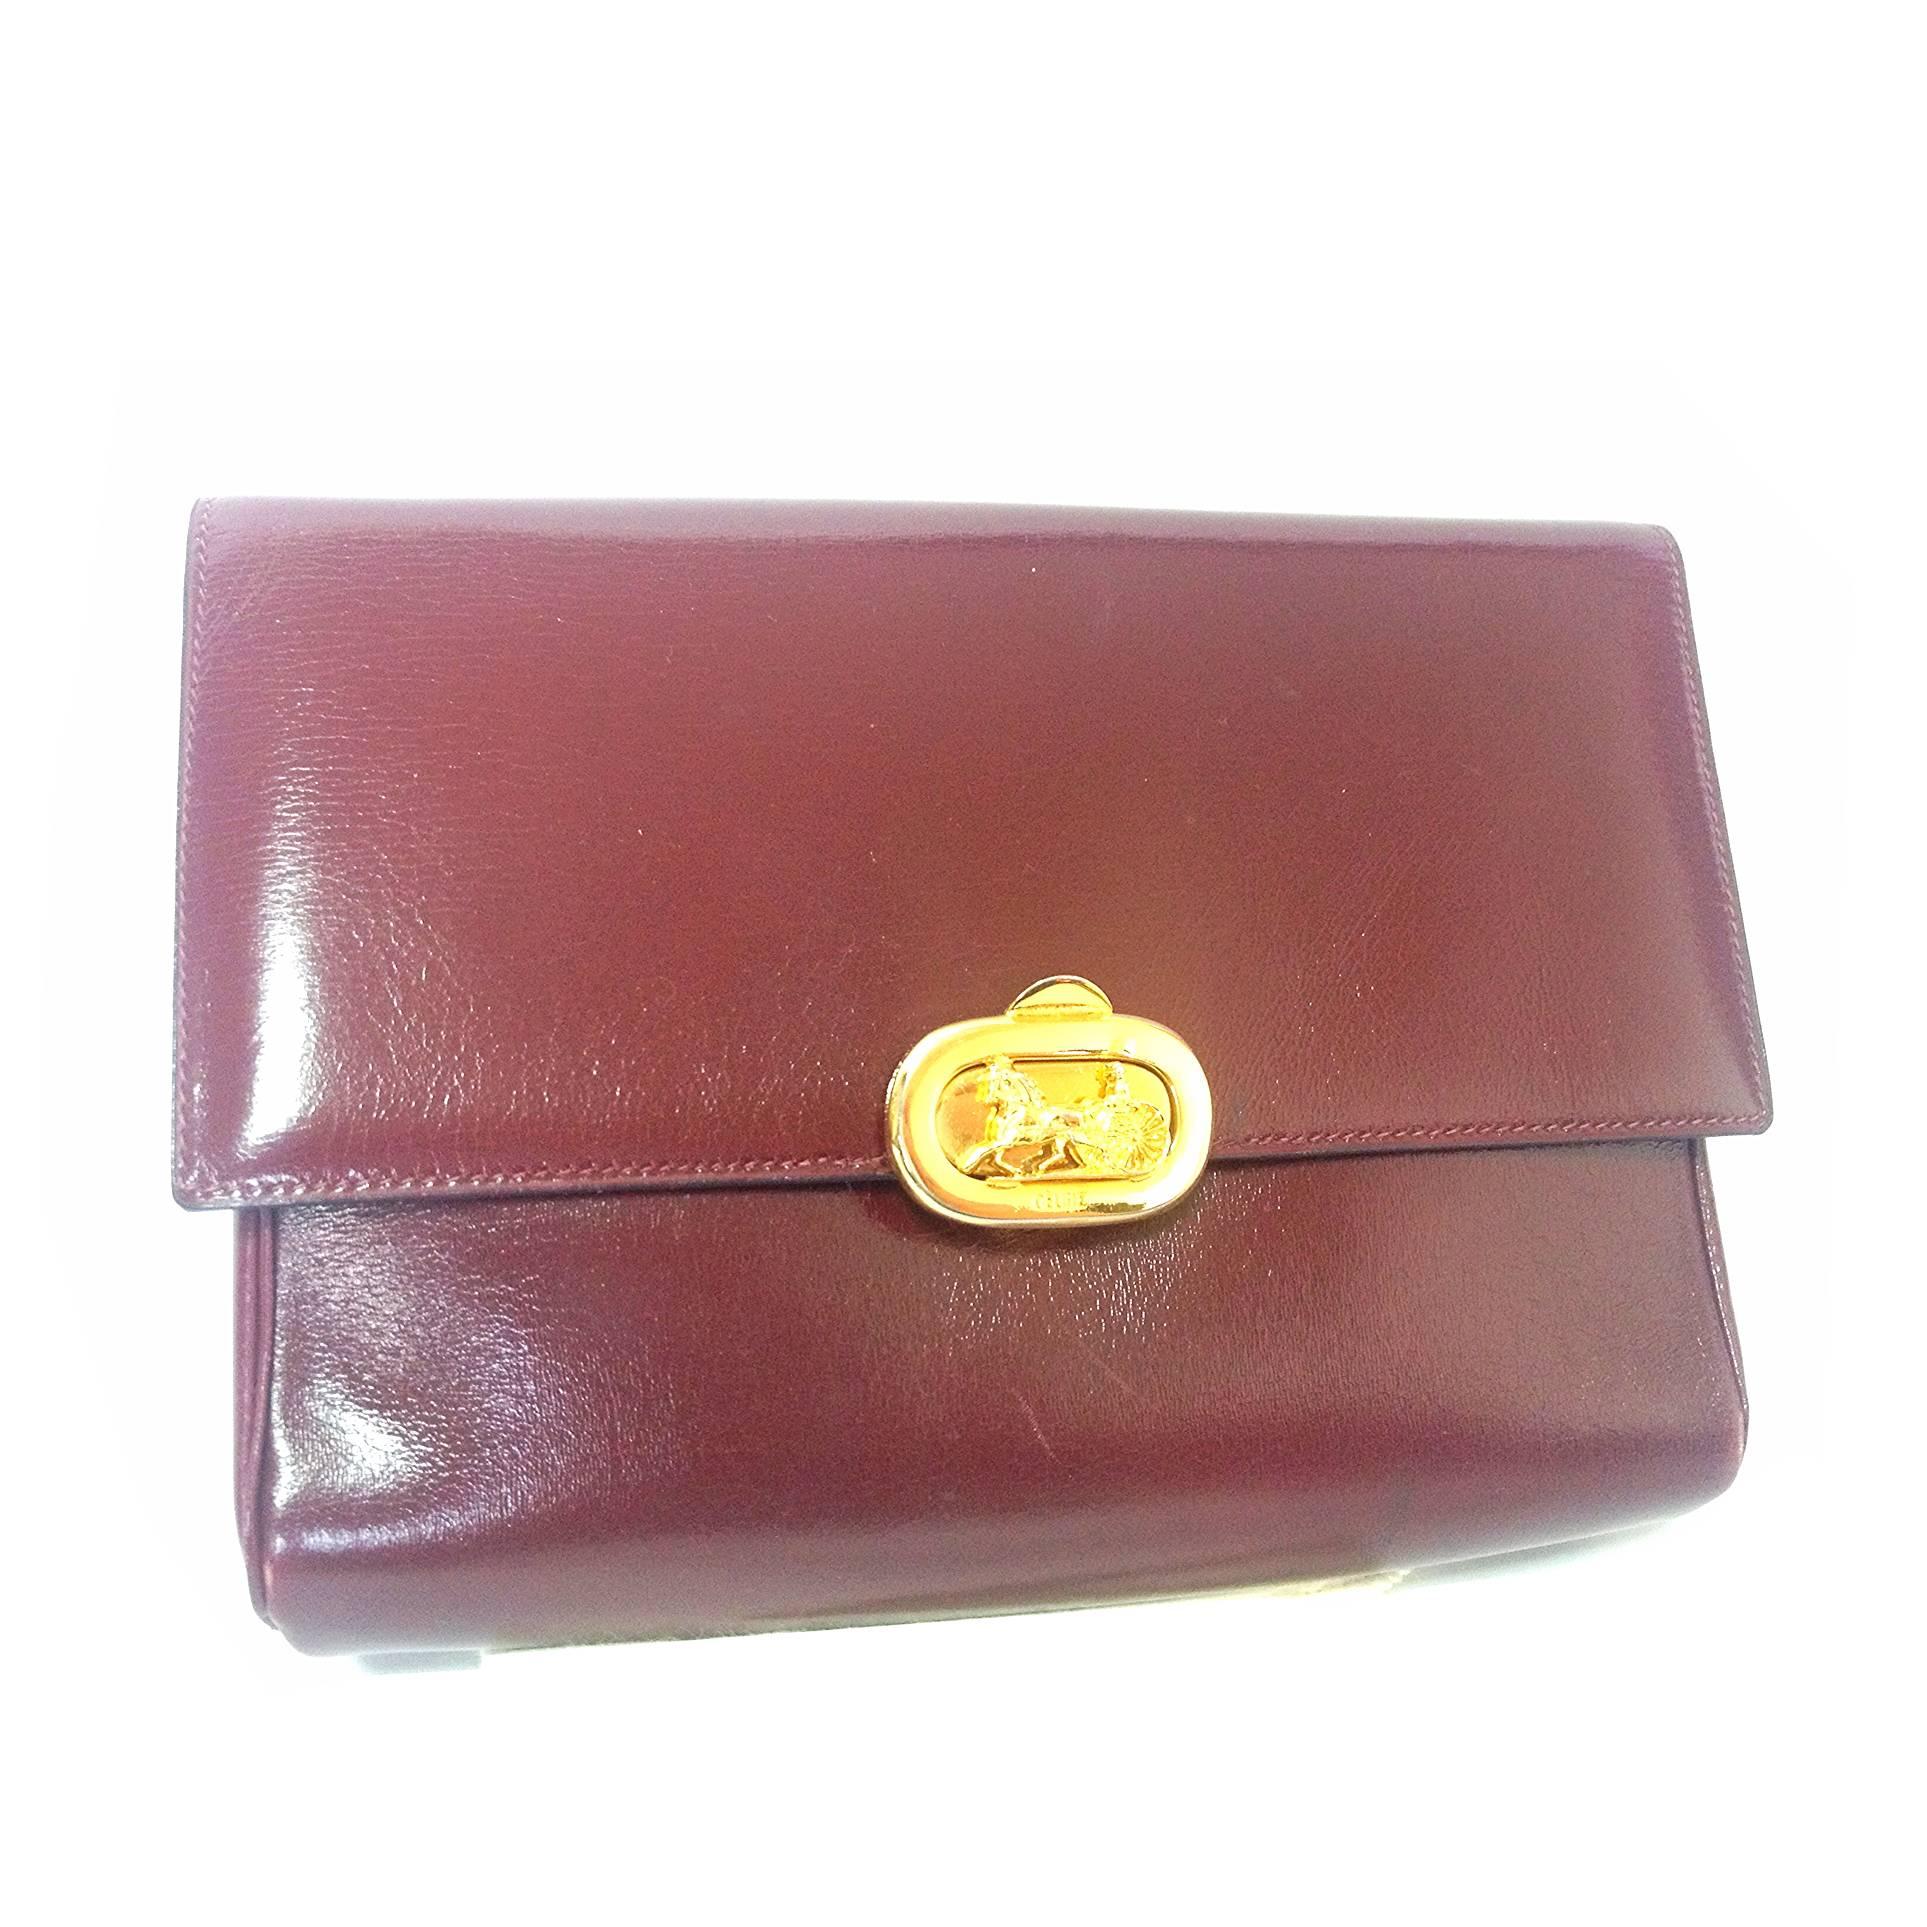 intage CELINE genuine wine brown leather clutch bag with golden carriage logo.